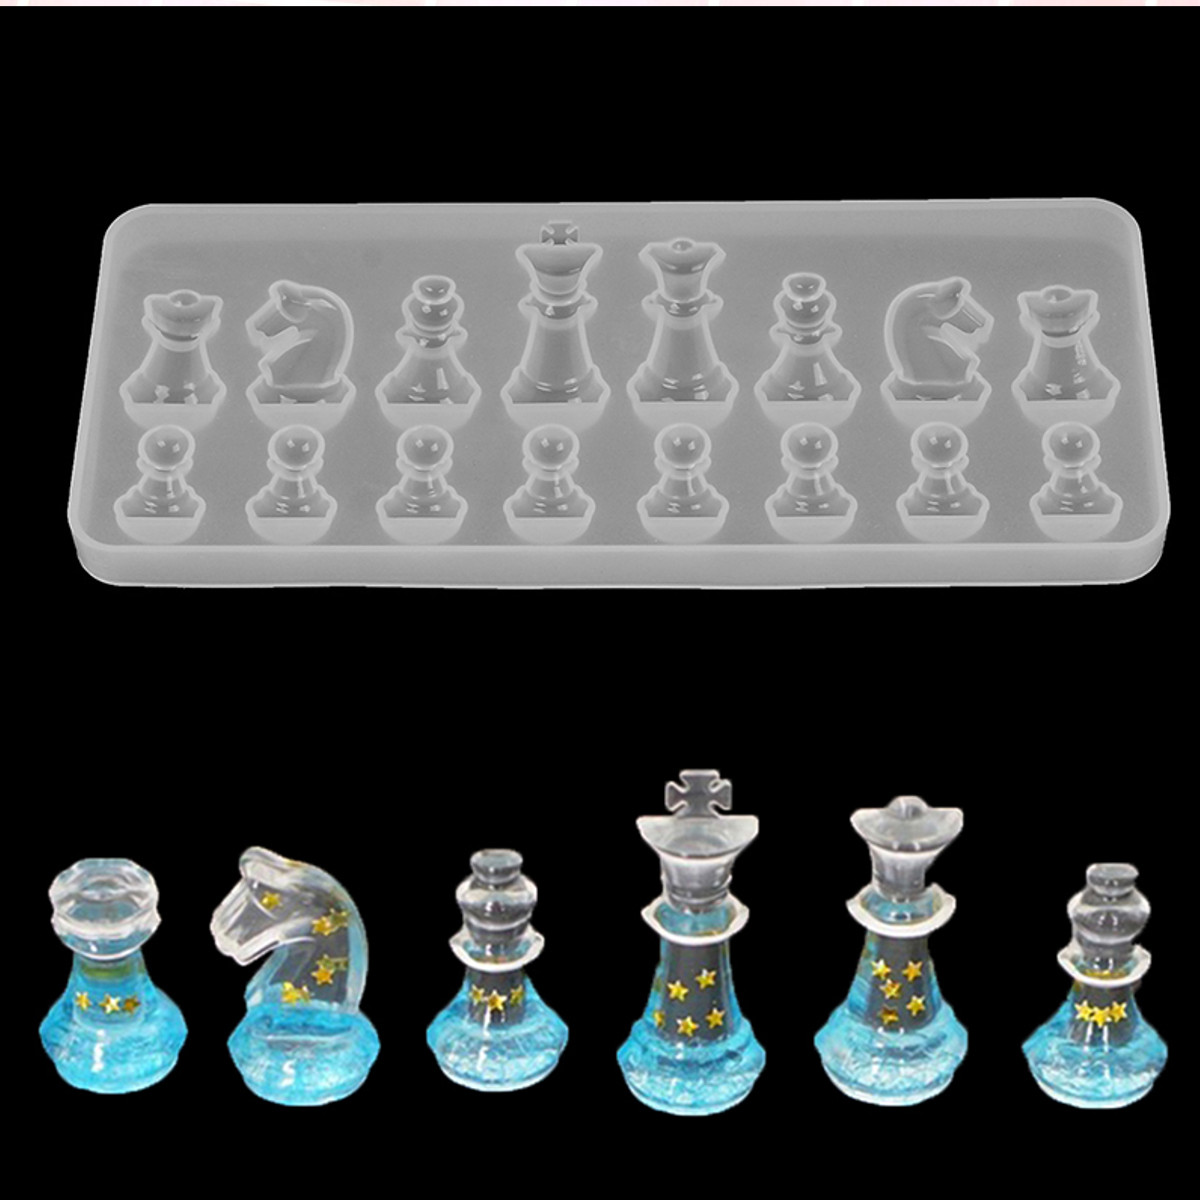 1PCS-Crystal-Chess-Silicone-Mold-for-DIY-Ornament-Resin-Casting-Craft-Mould-Tool-1714219